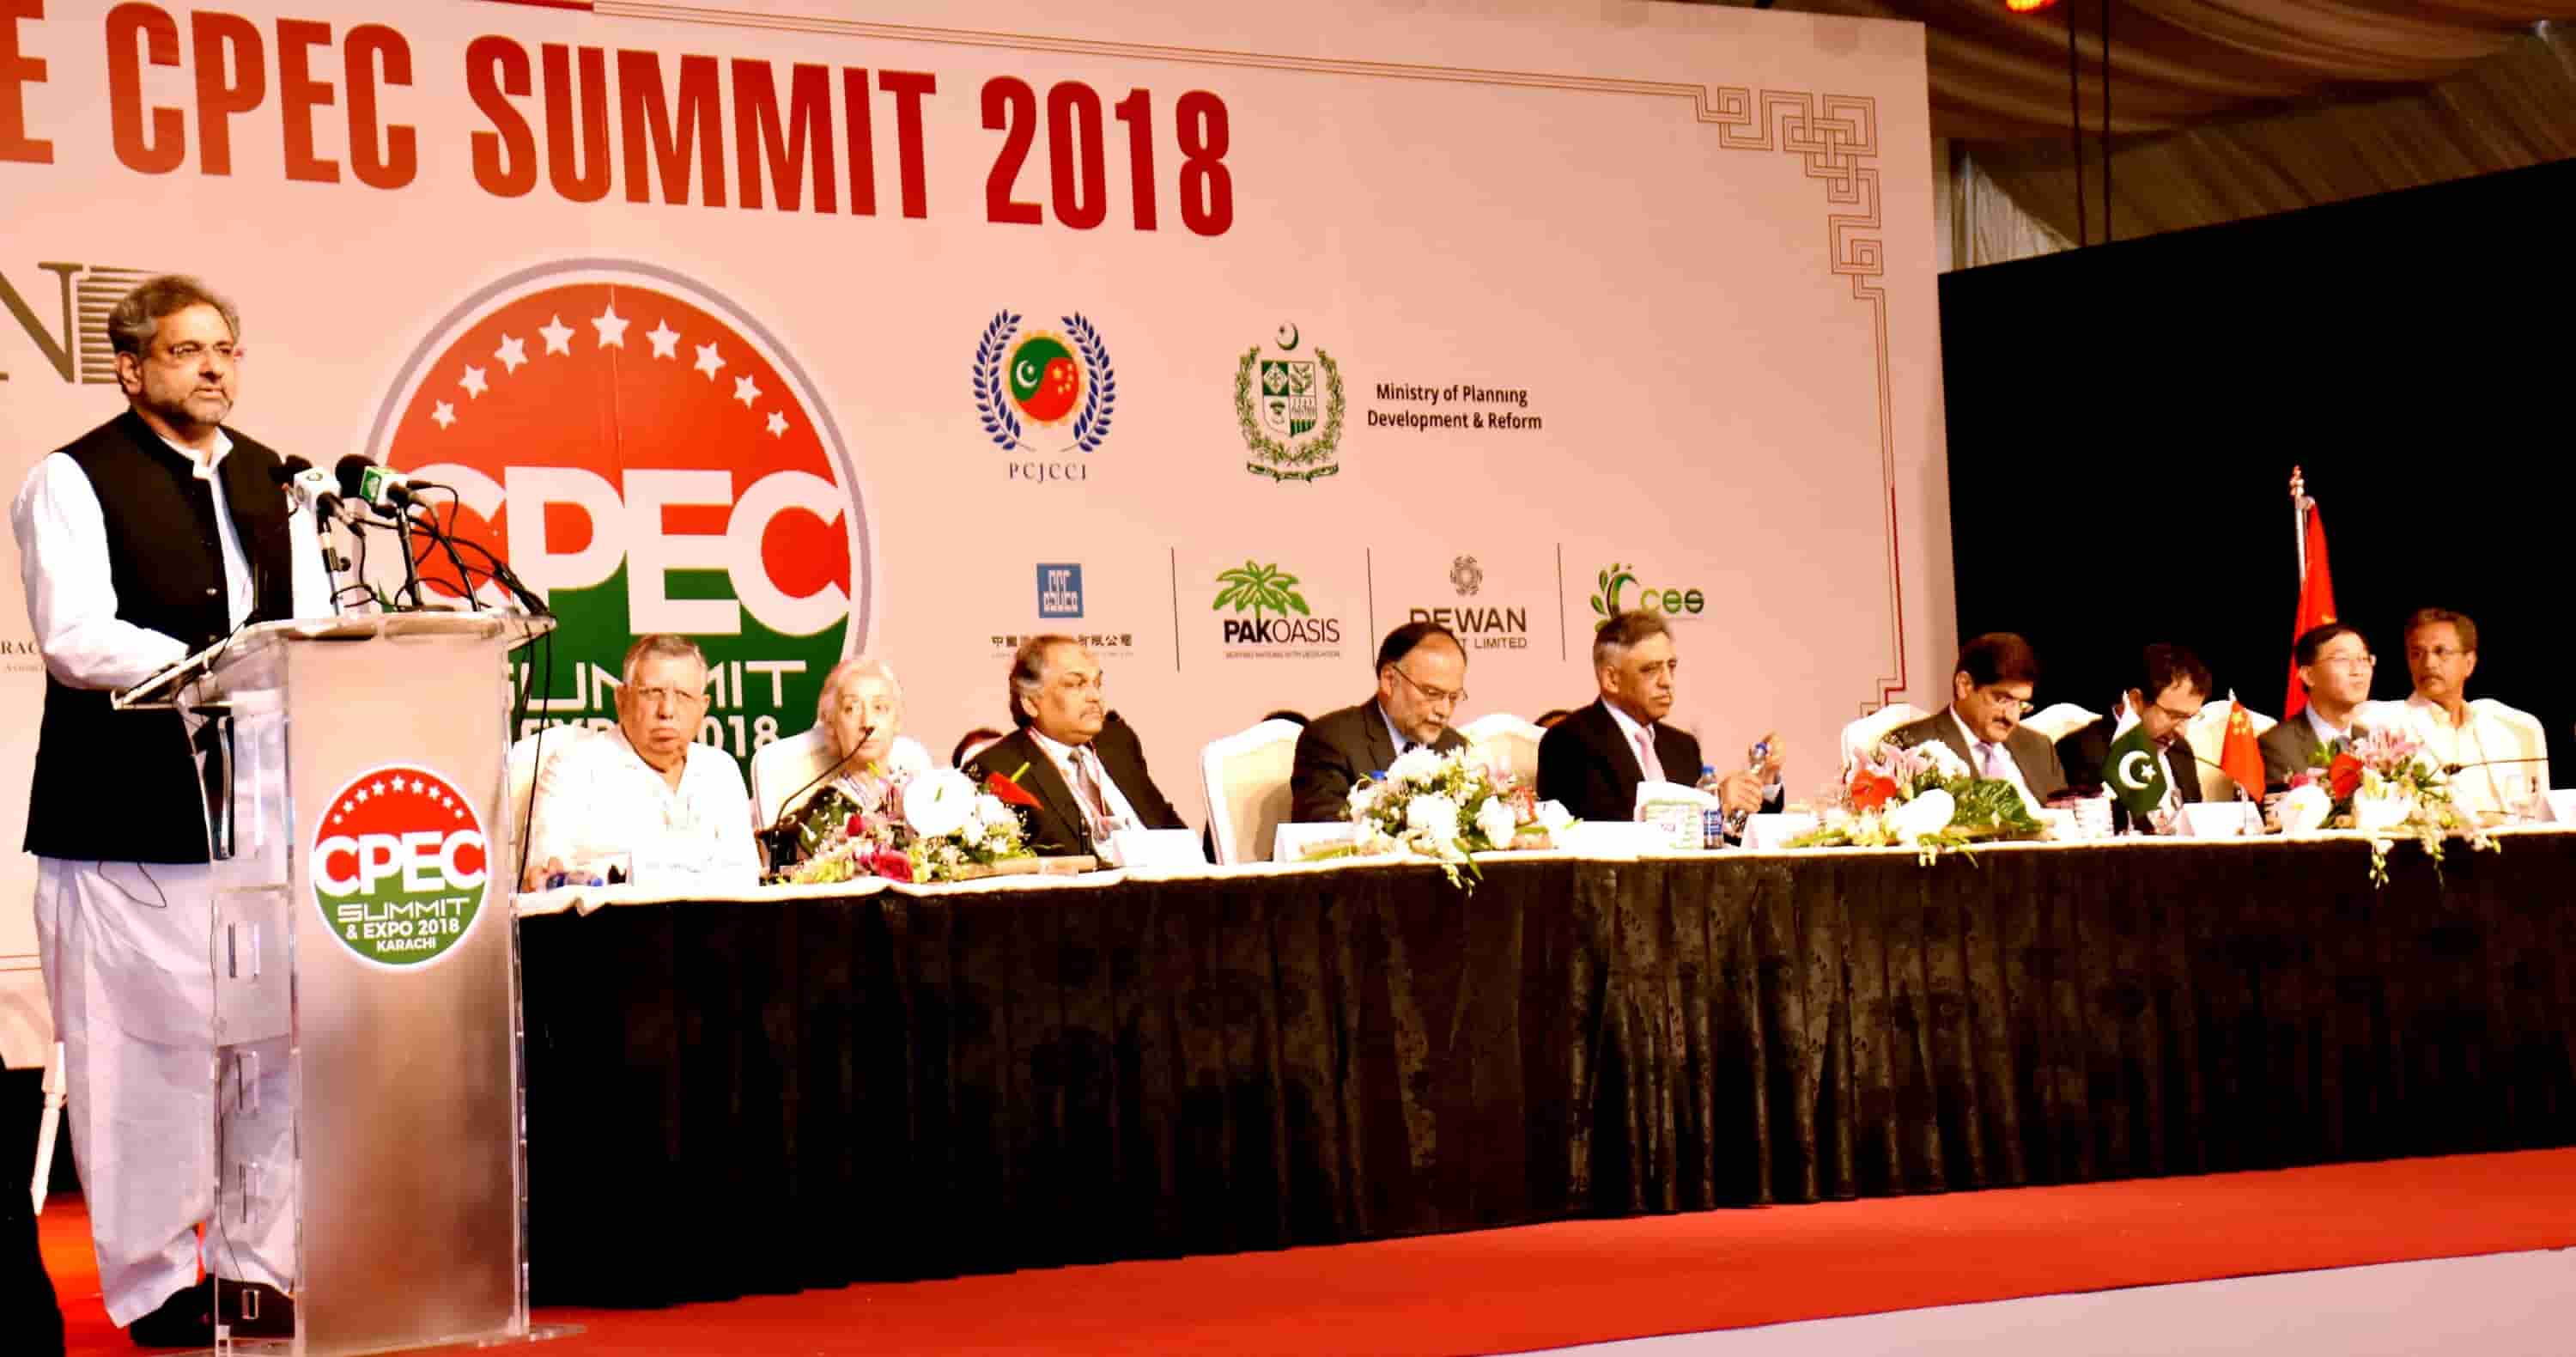 CPEC Summit and Expo at Karachi on 23-24 April 2018